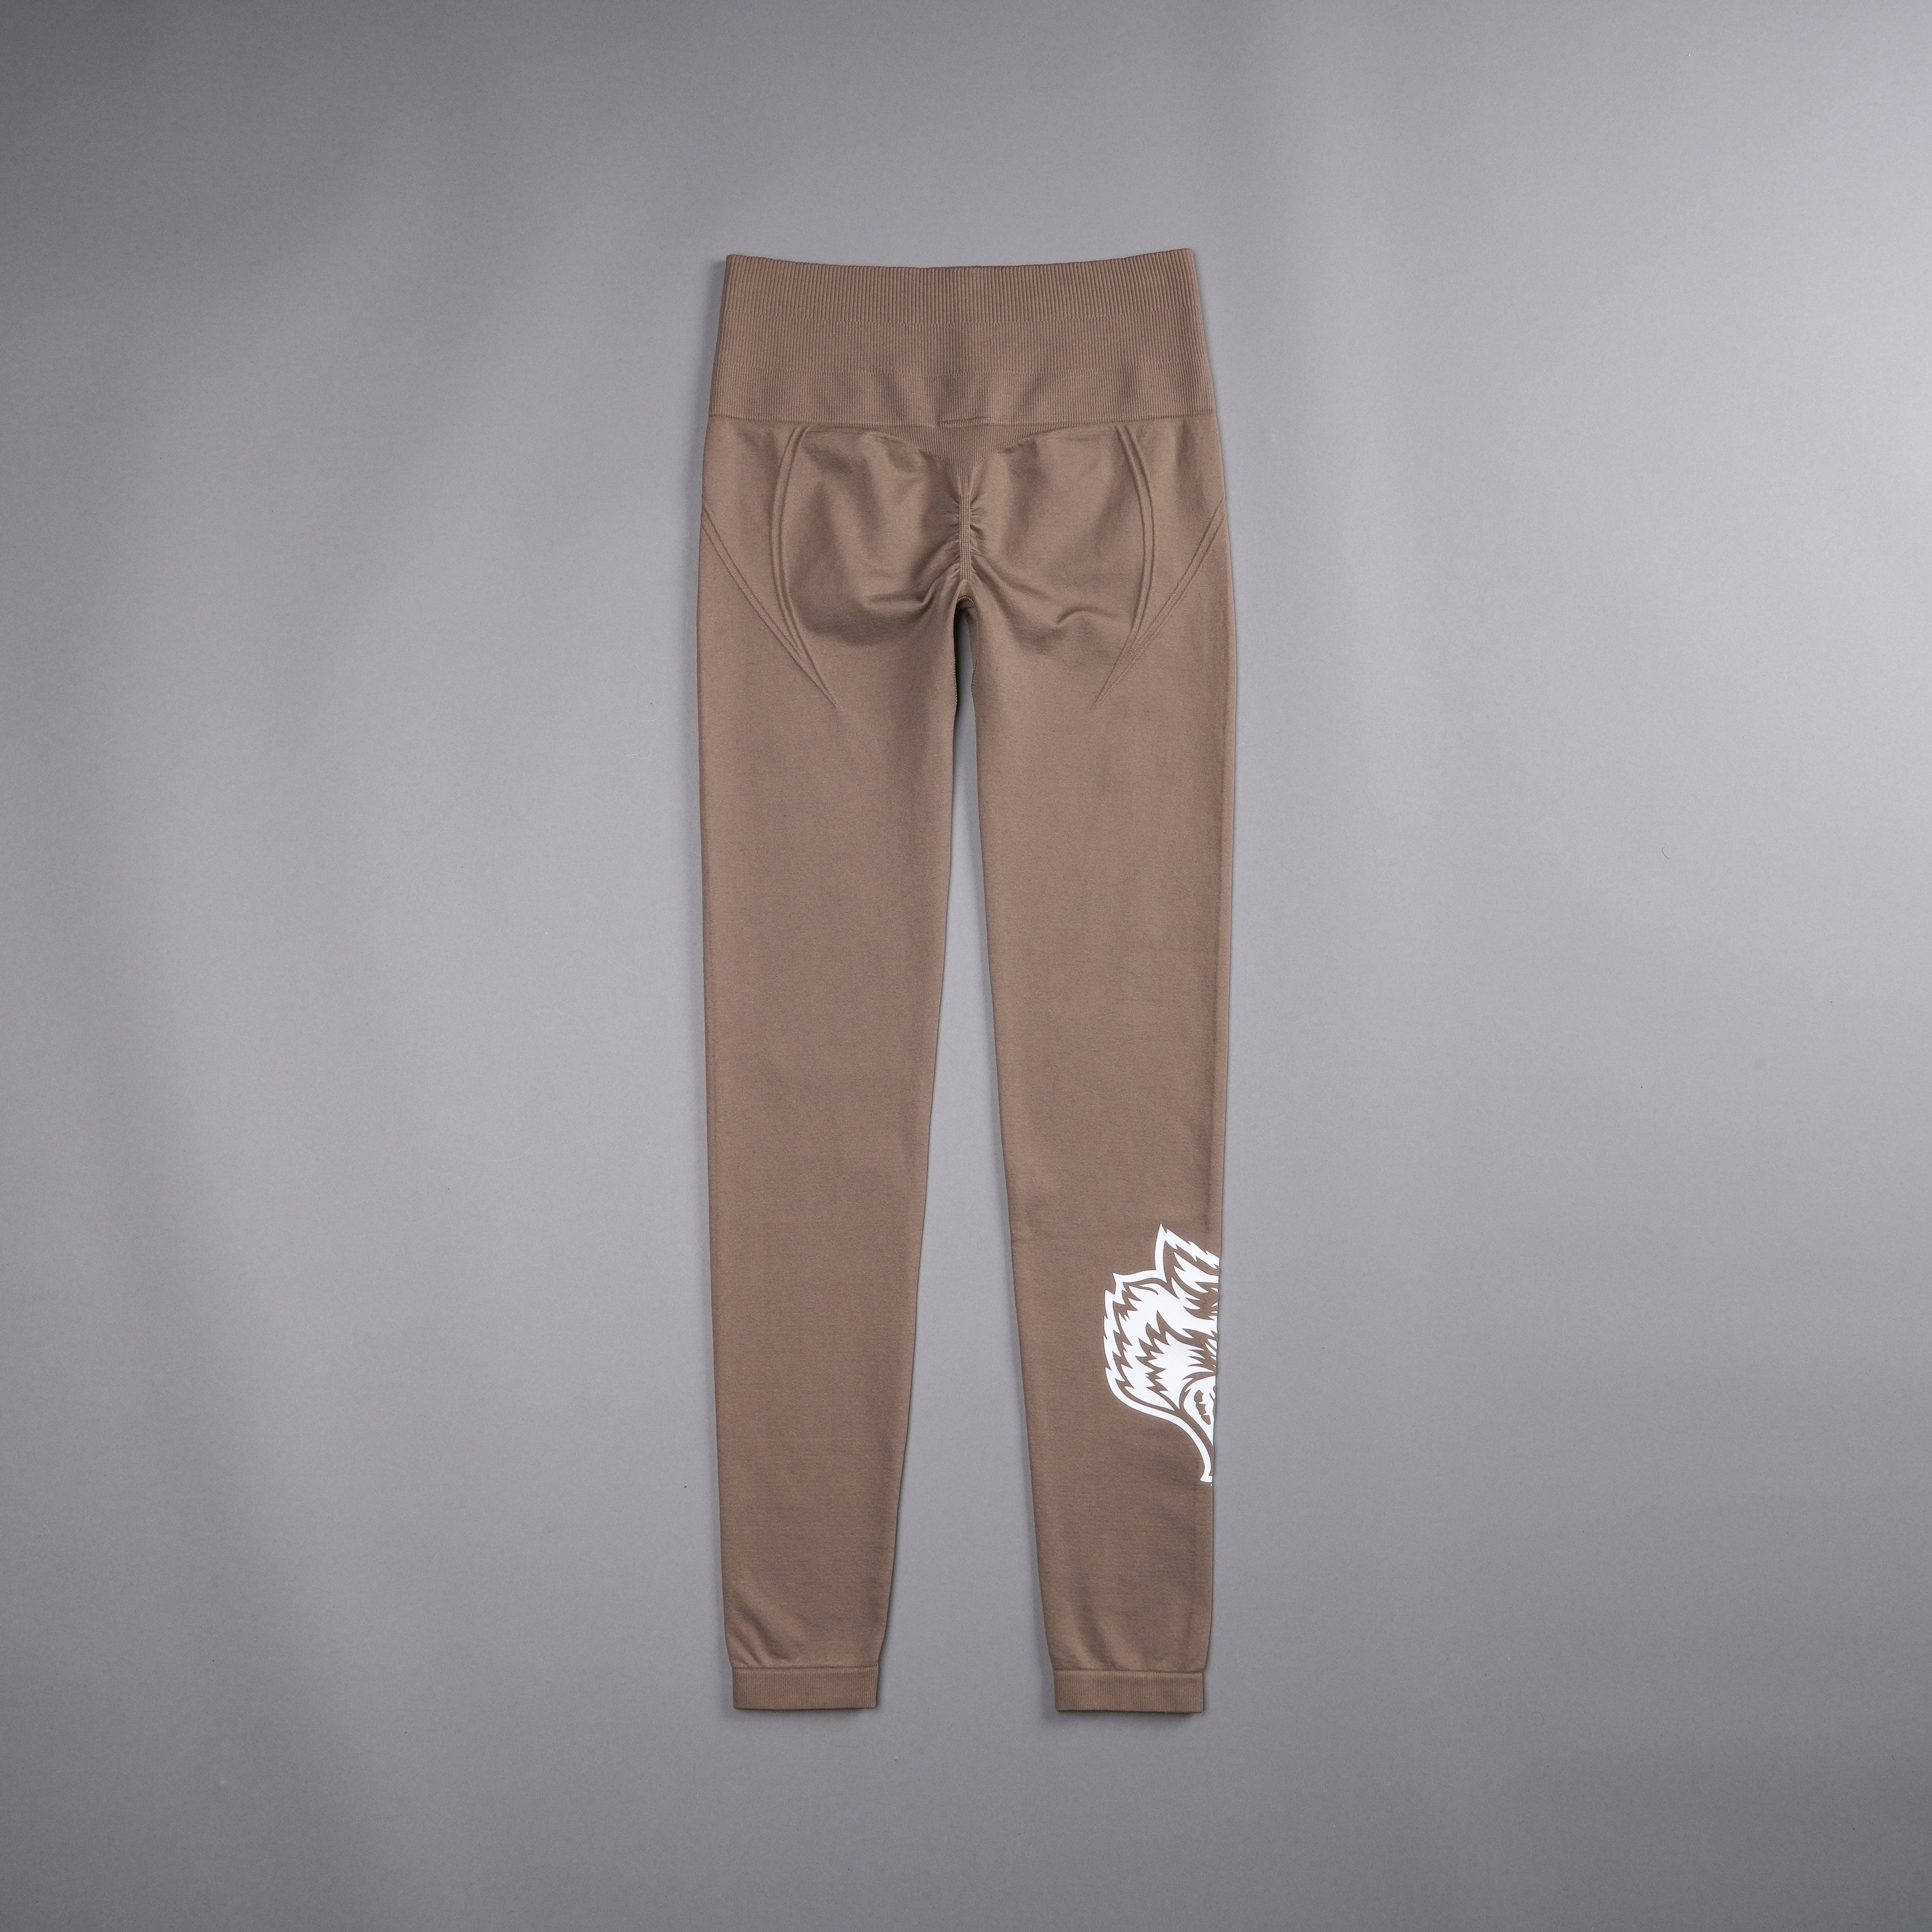 Western Wolves "Everson Seamless" Huxley Scrunch Leggings in Mojave Brown